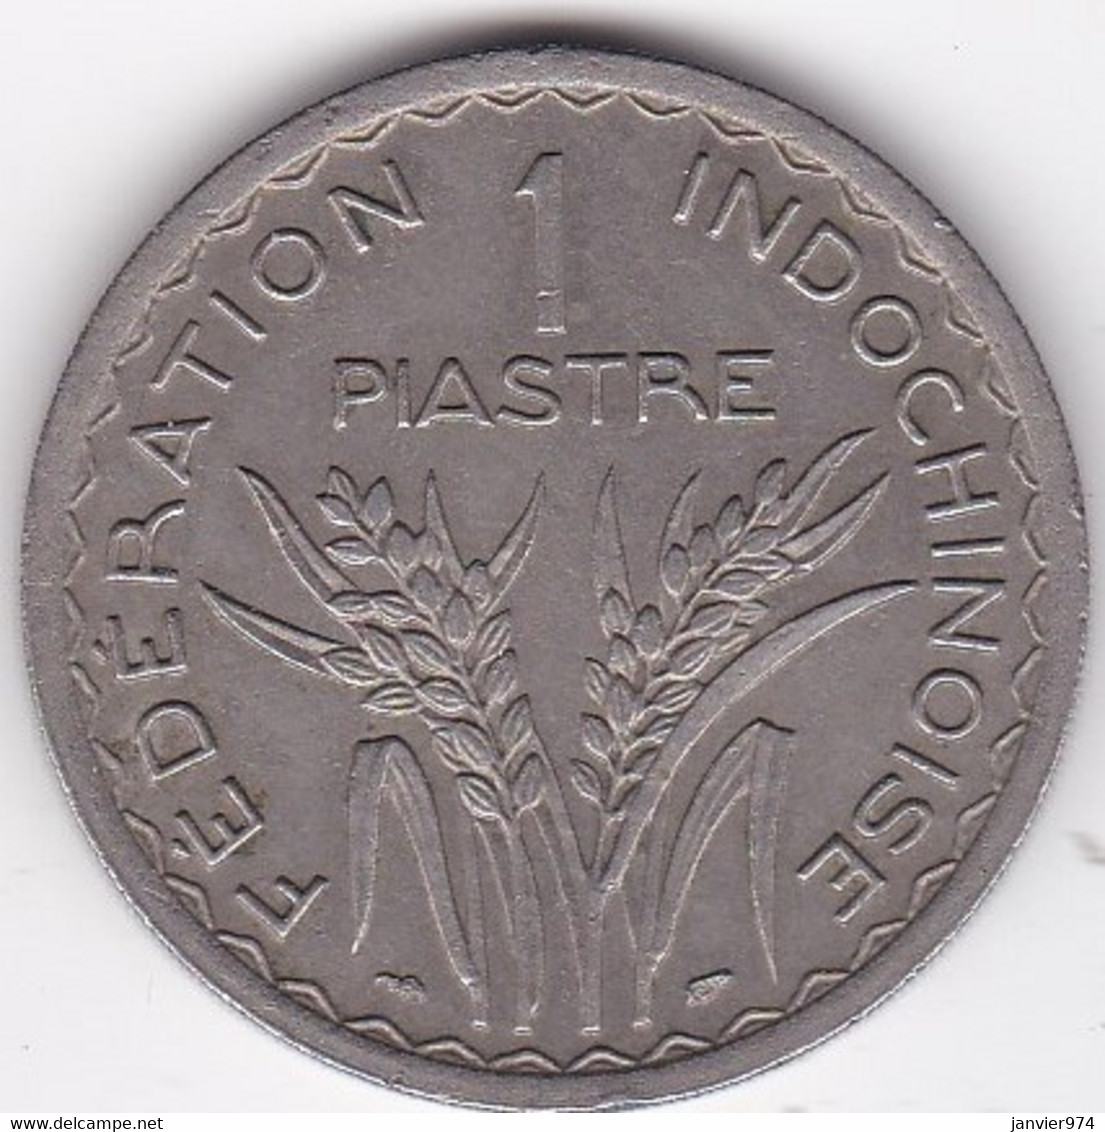 Indochine Union Française, 1 Piastre 1947, Tranche Striée, Cupronickel, Lec# 320 - French Indochina